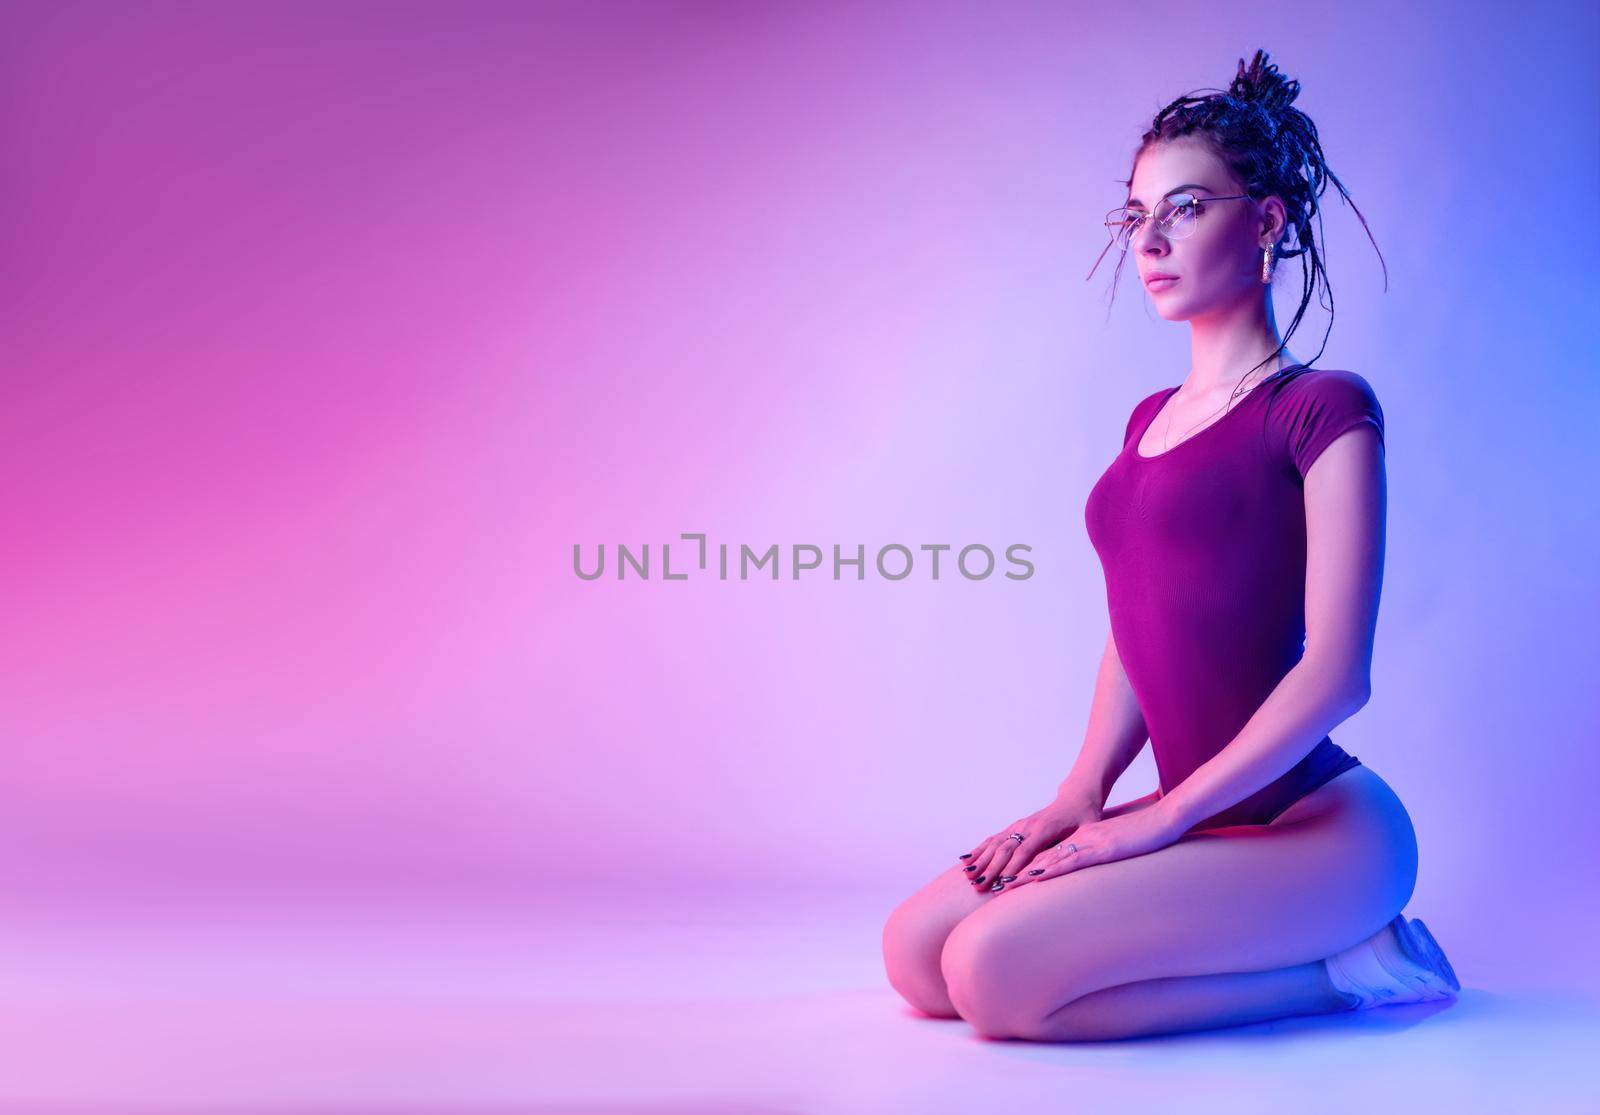 the girl dressed in a bodysuit with dreadlocks on her head is sitting on the floor on a white background in neon light